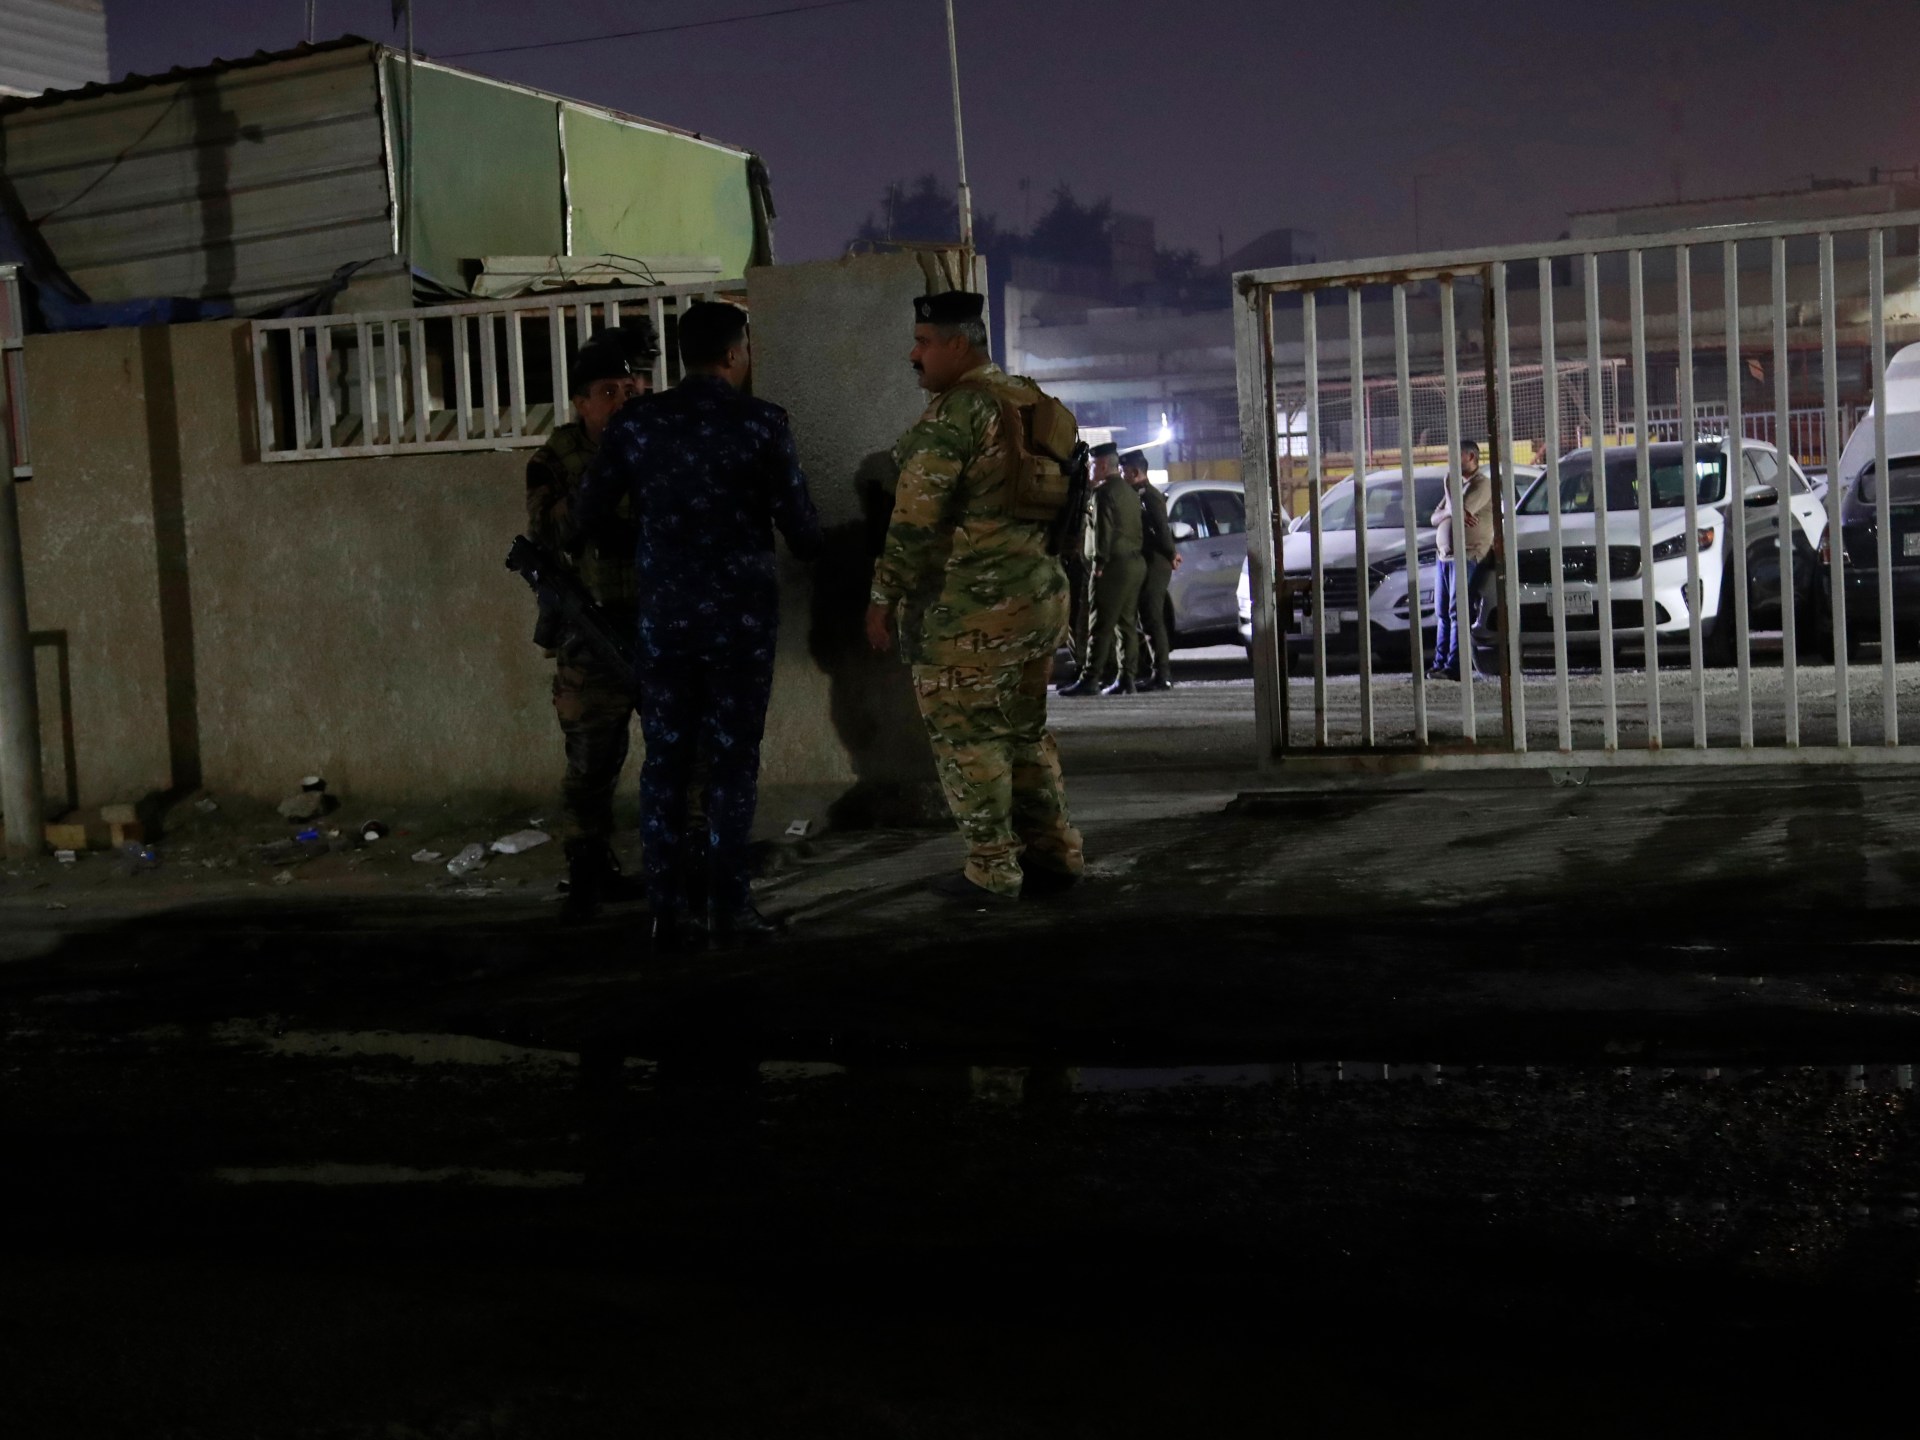 us-aid-worker-shot-dead-in-baghdad-in-rare-attack-officials